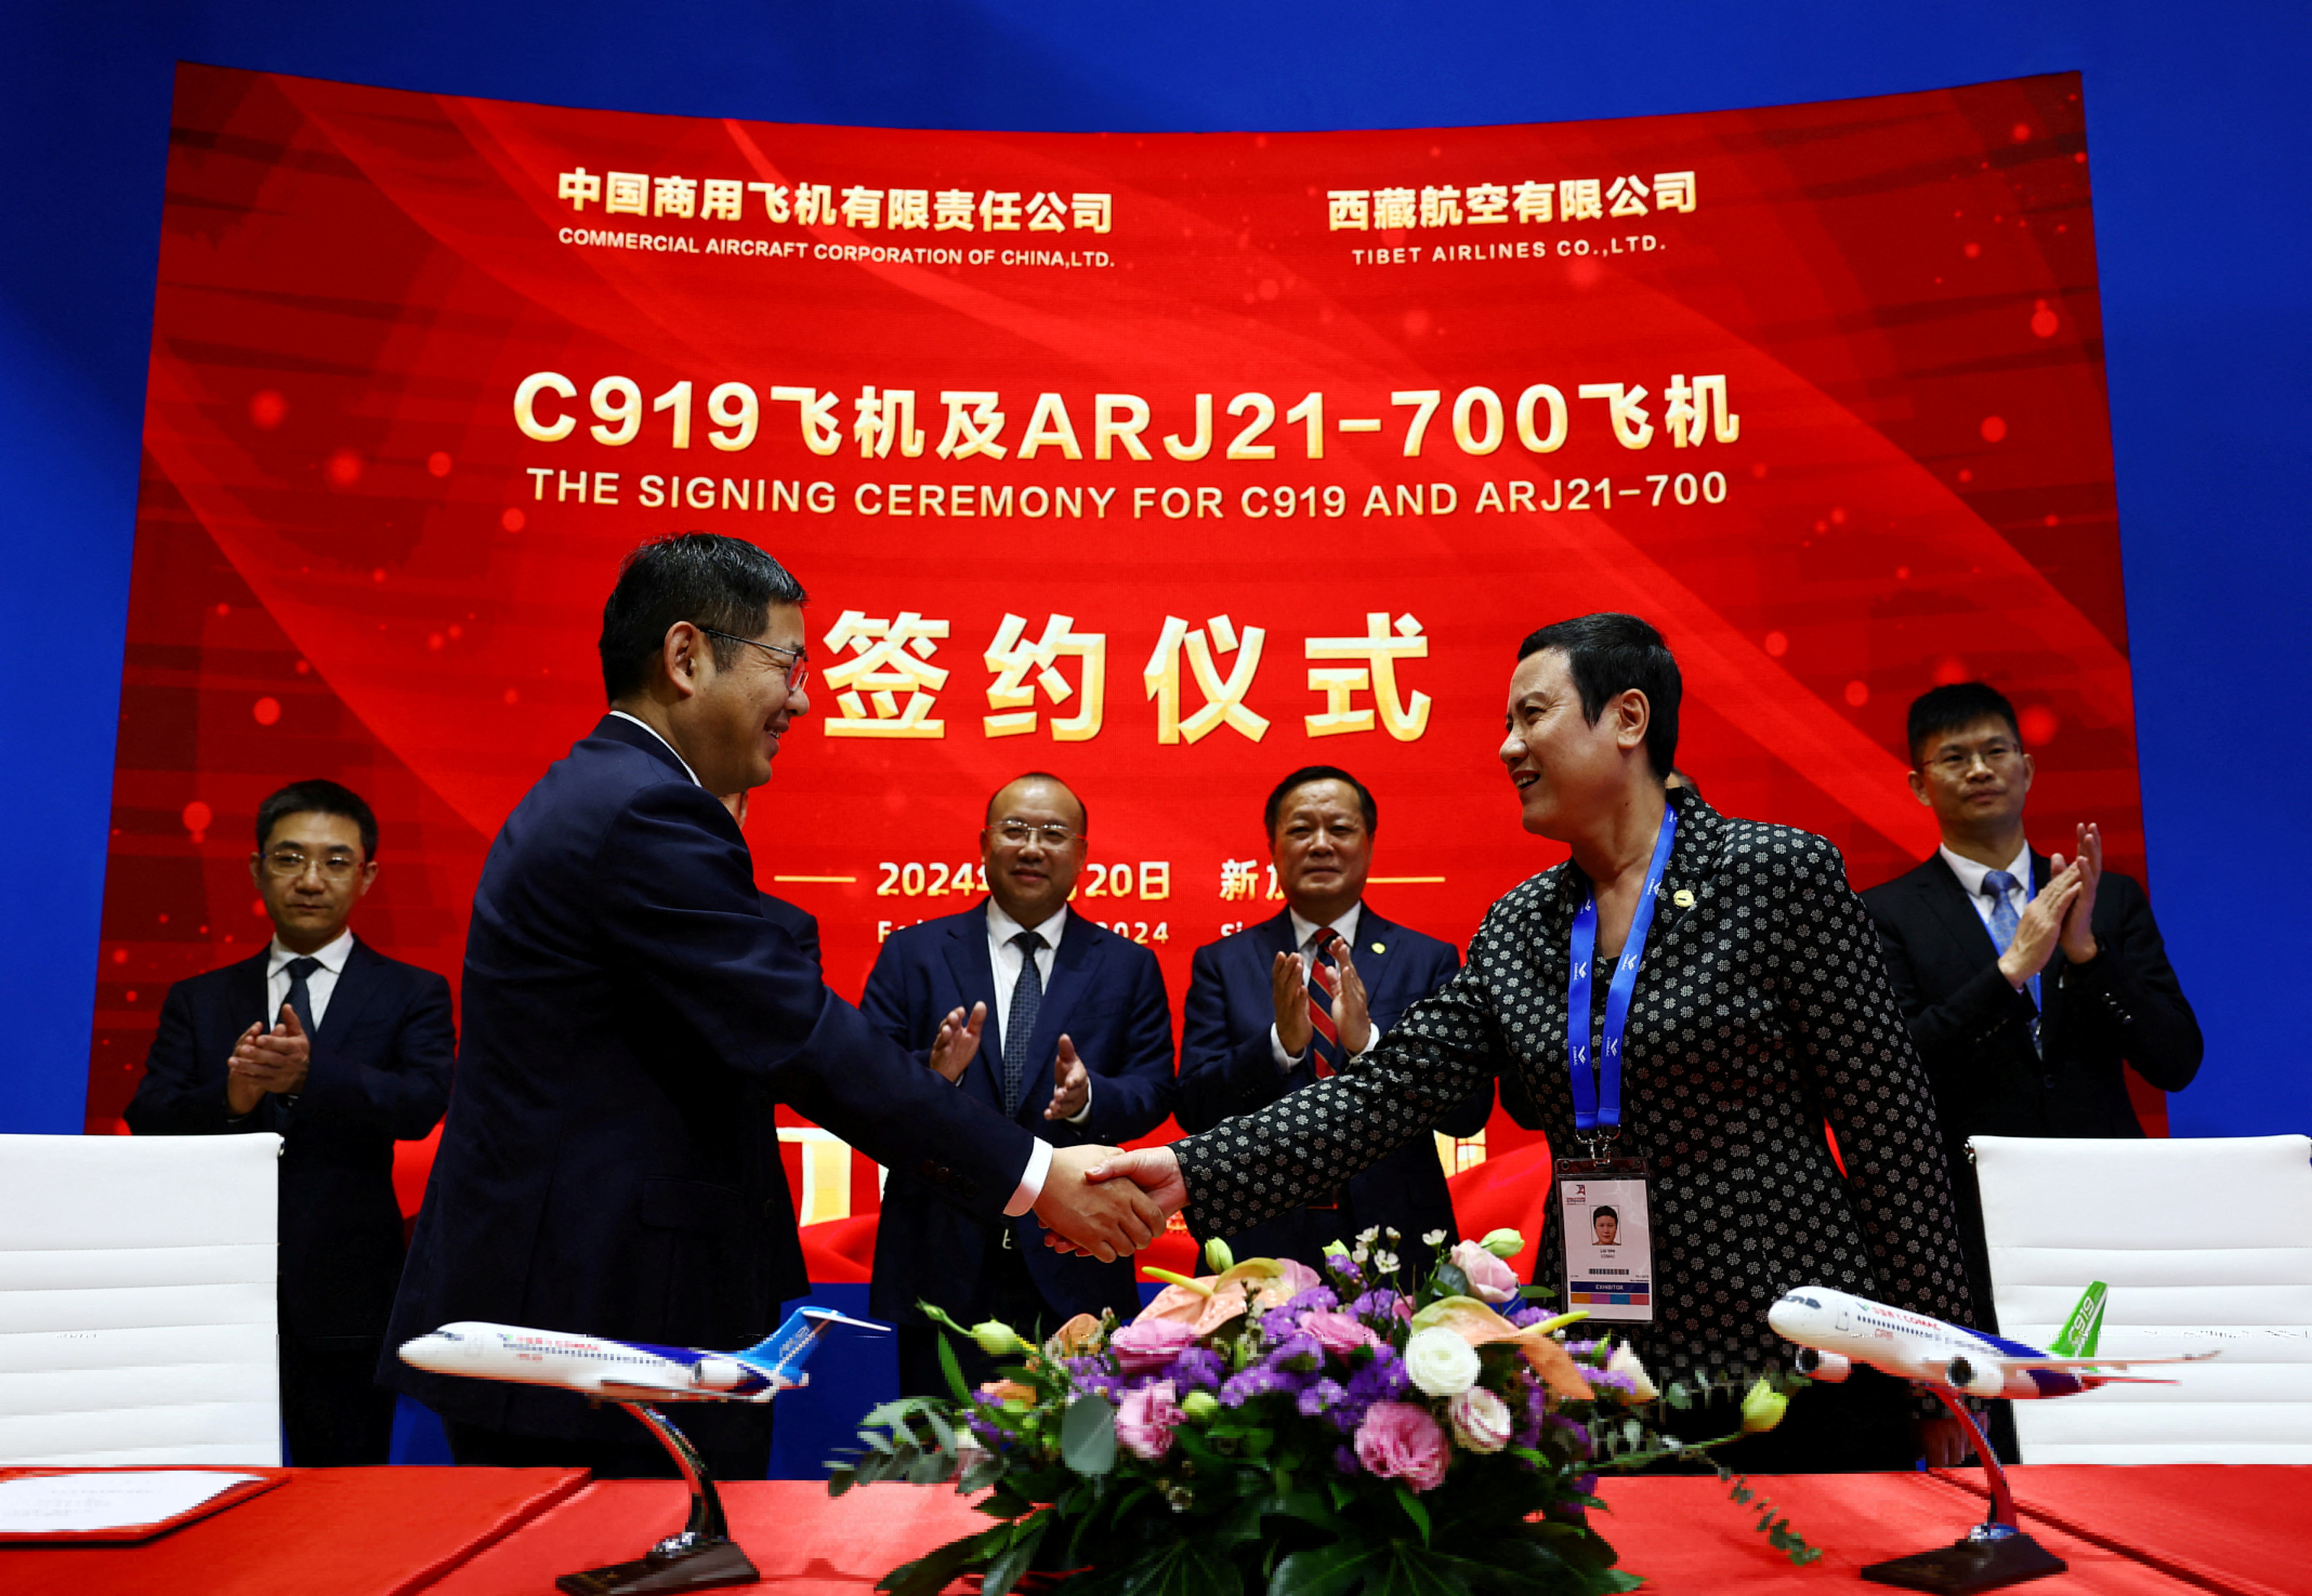 Comac's Chairman He Dongfeng witnesses a signing ceremony between Comac and Tibet Airlines during the Singapore Airshow at Changi Exhibition Centre in Singapore